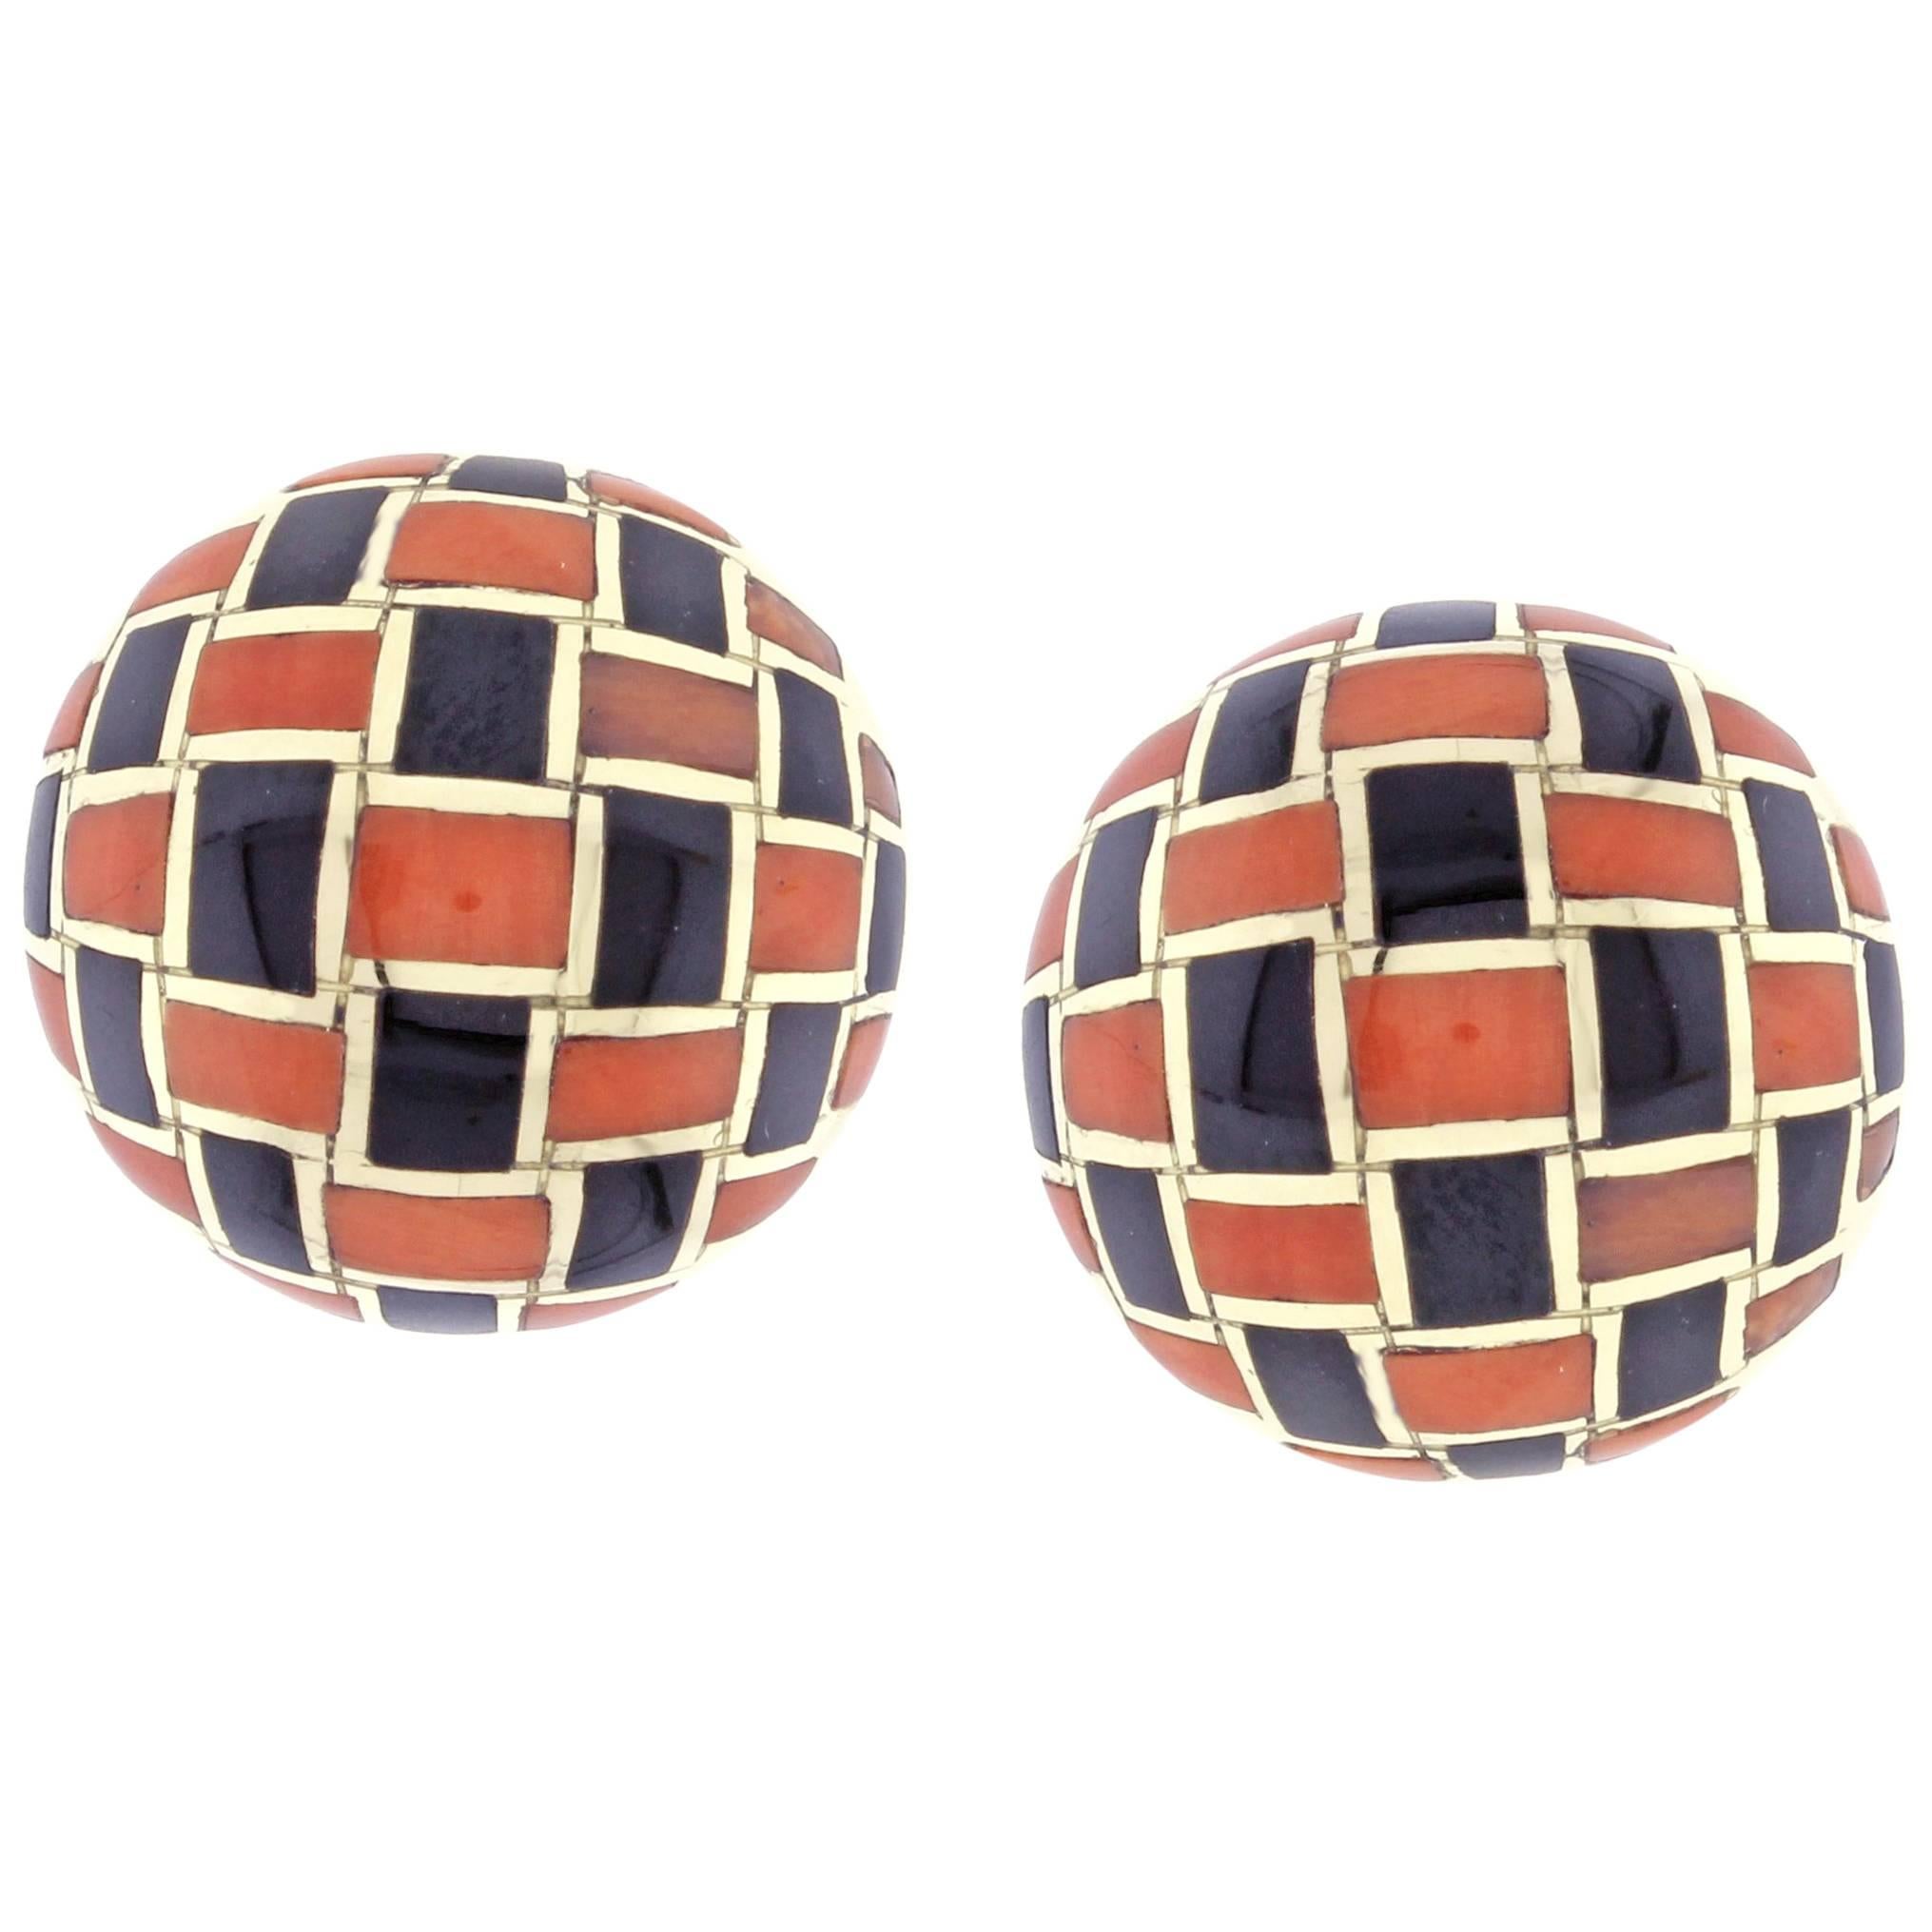 Tiffany & Co. Coral and Onyx Checker Board Earrings